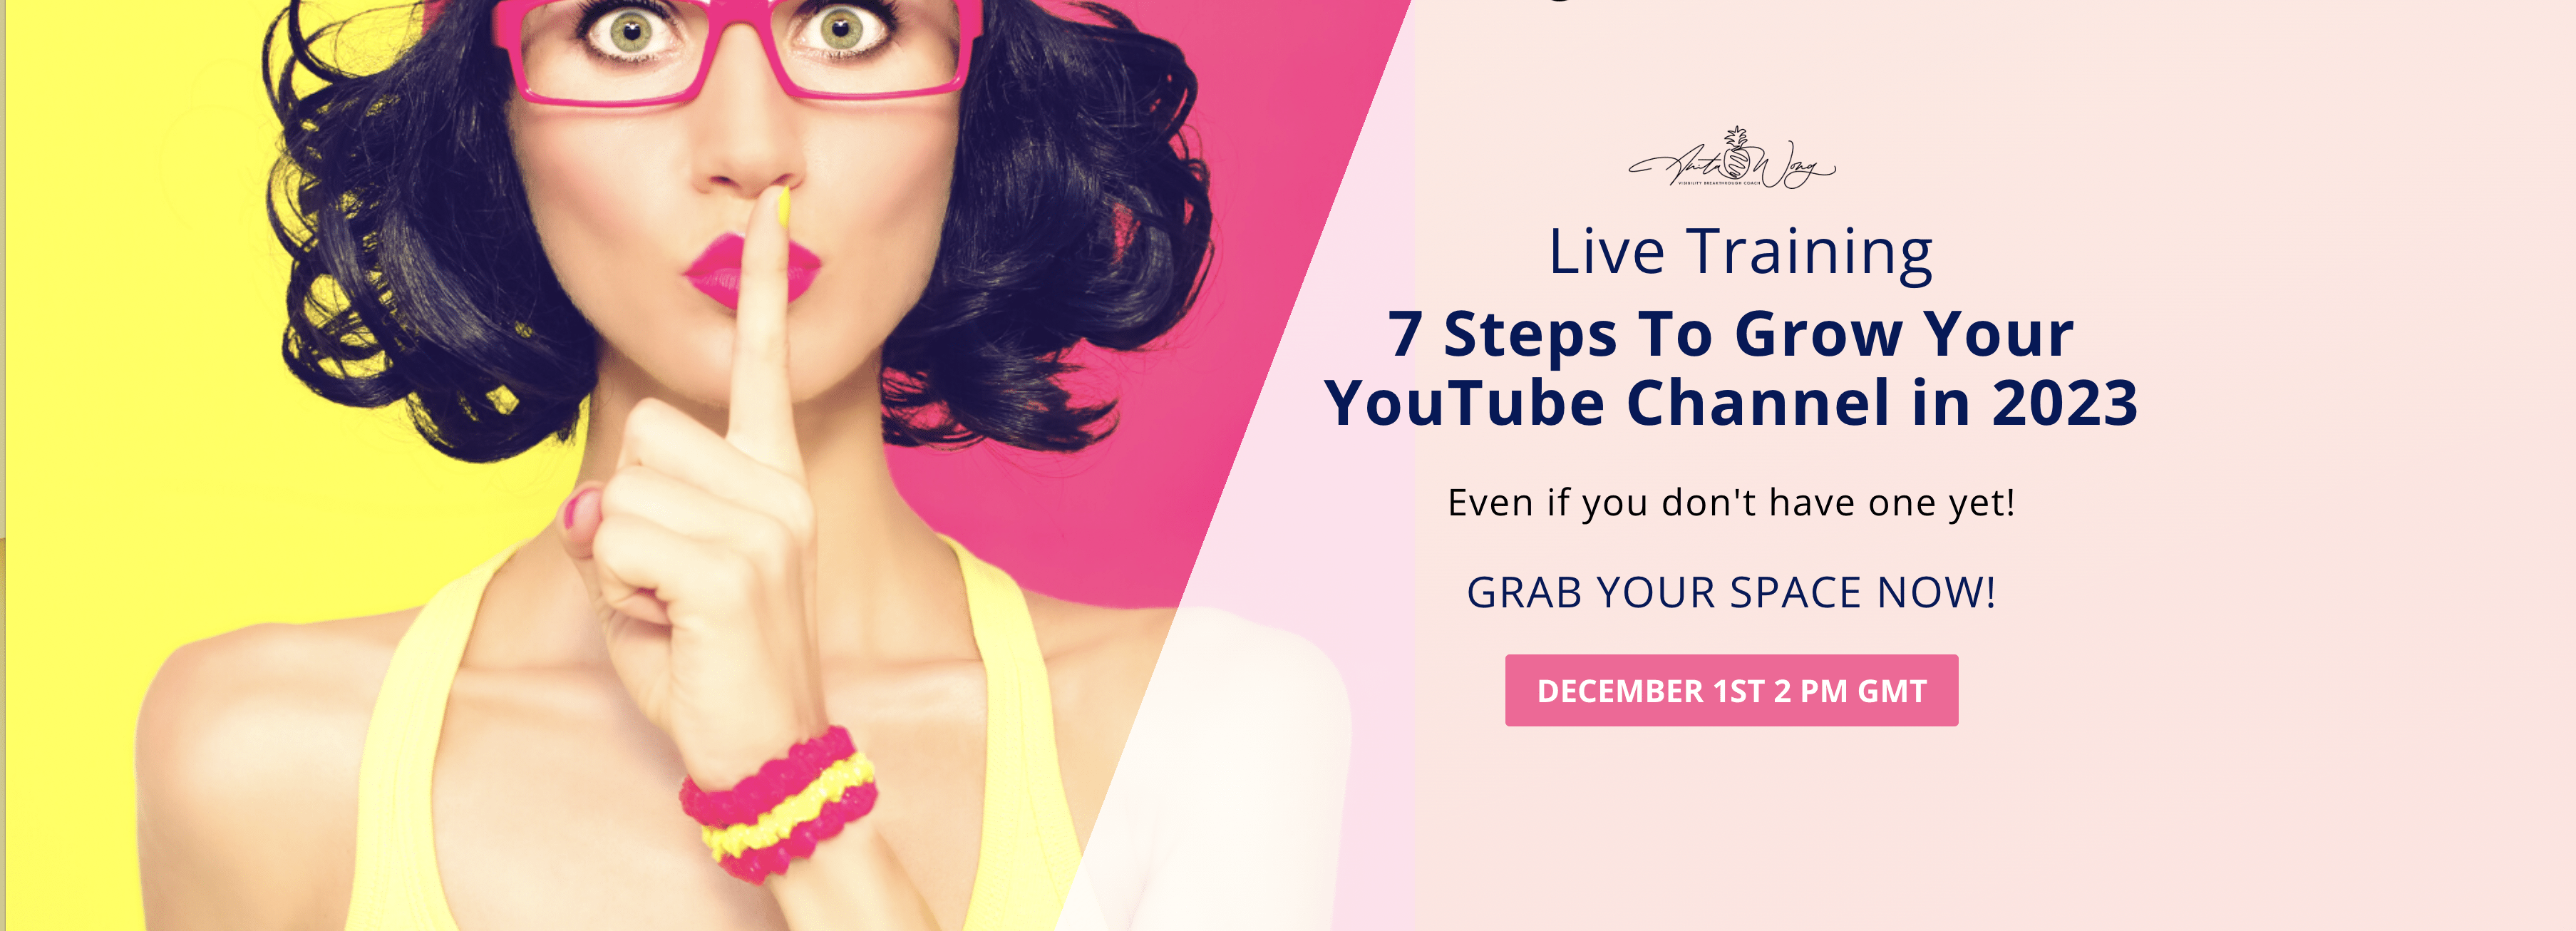 7 Steps To Grow Your YouTube Channel